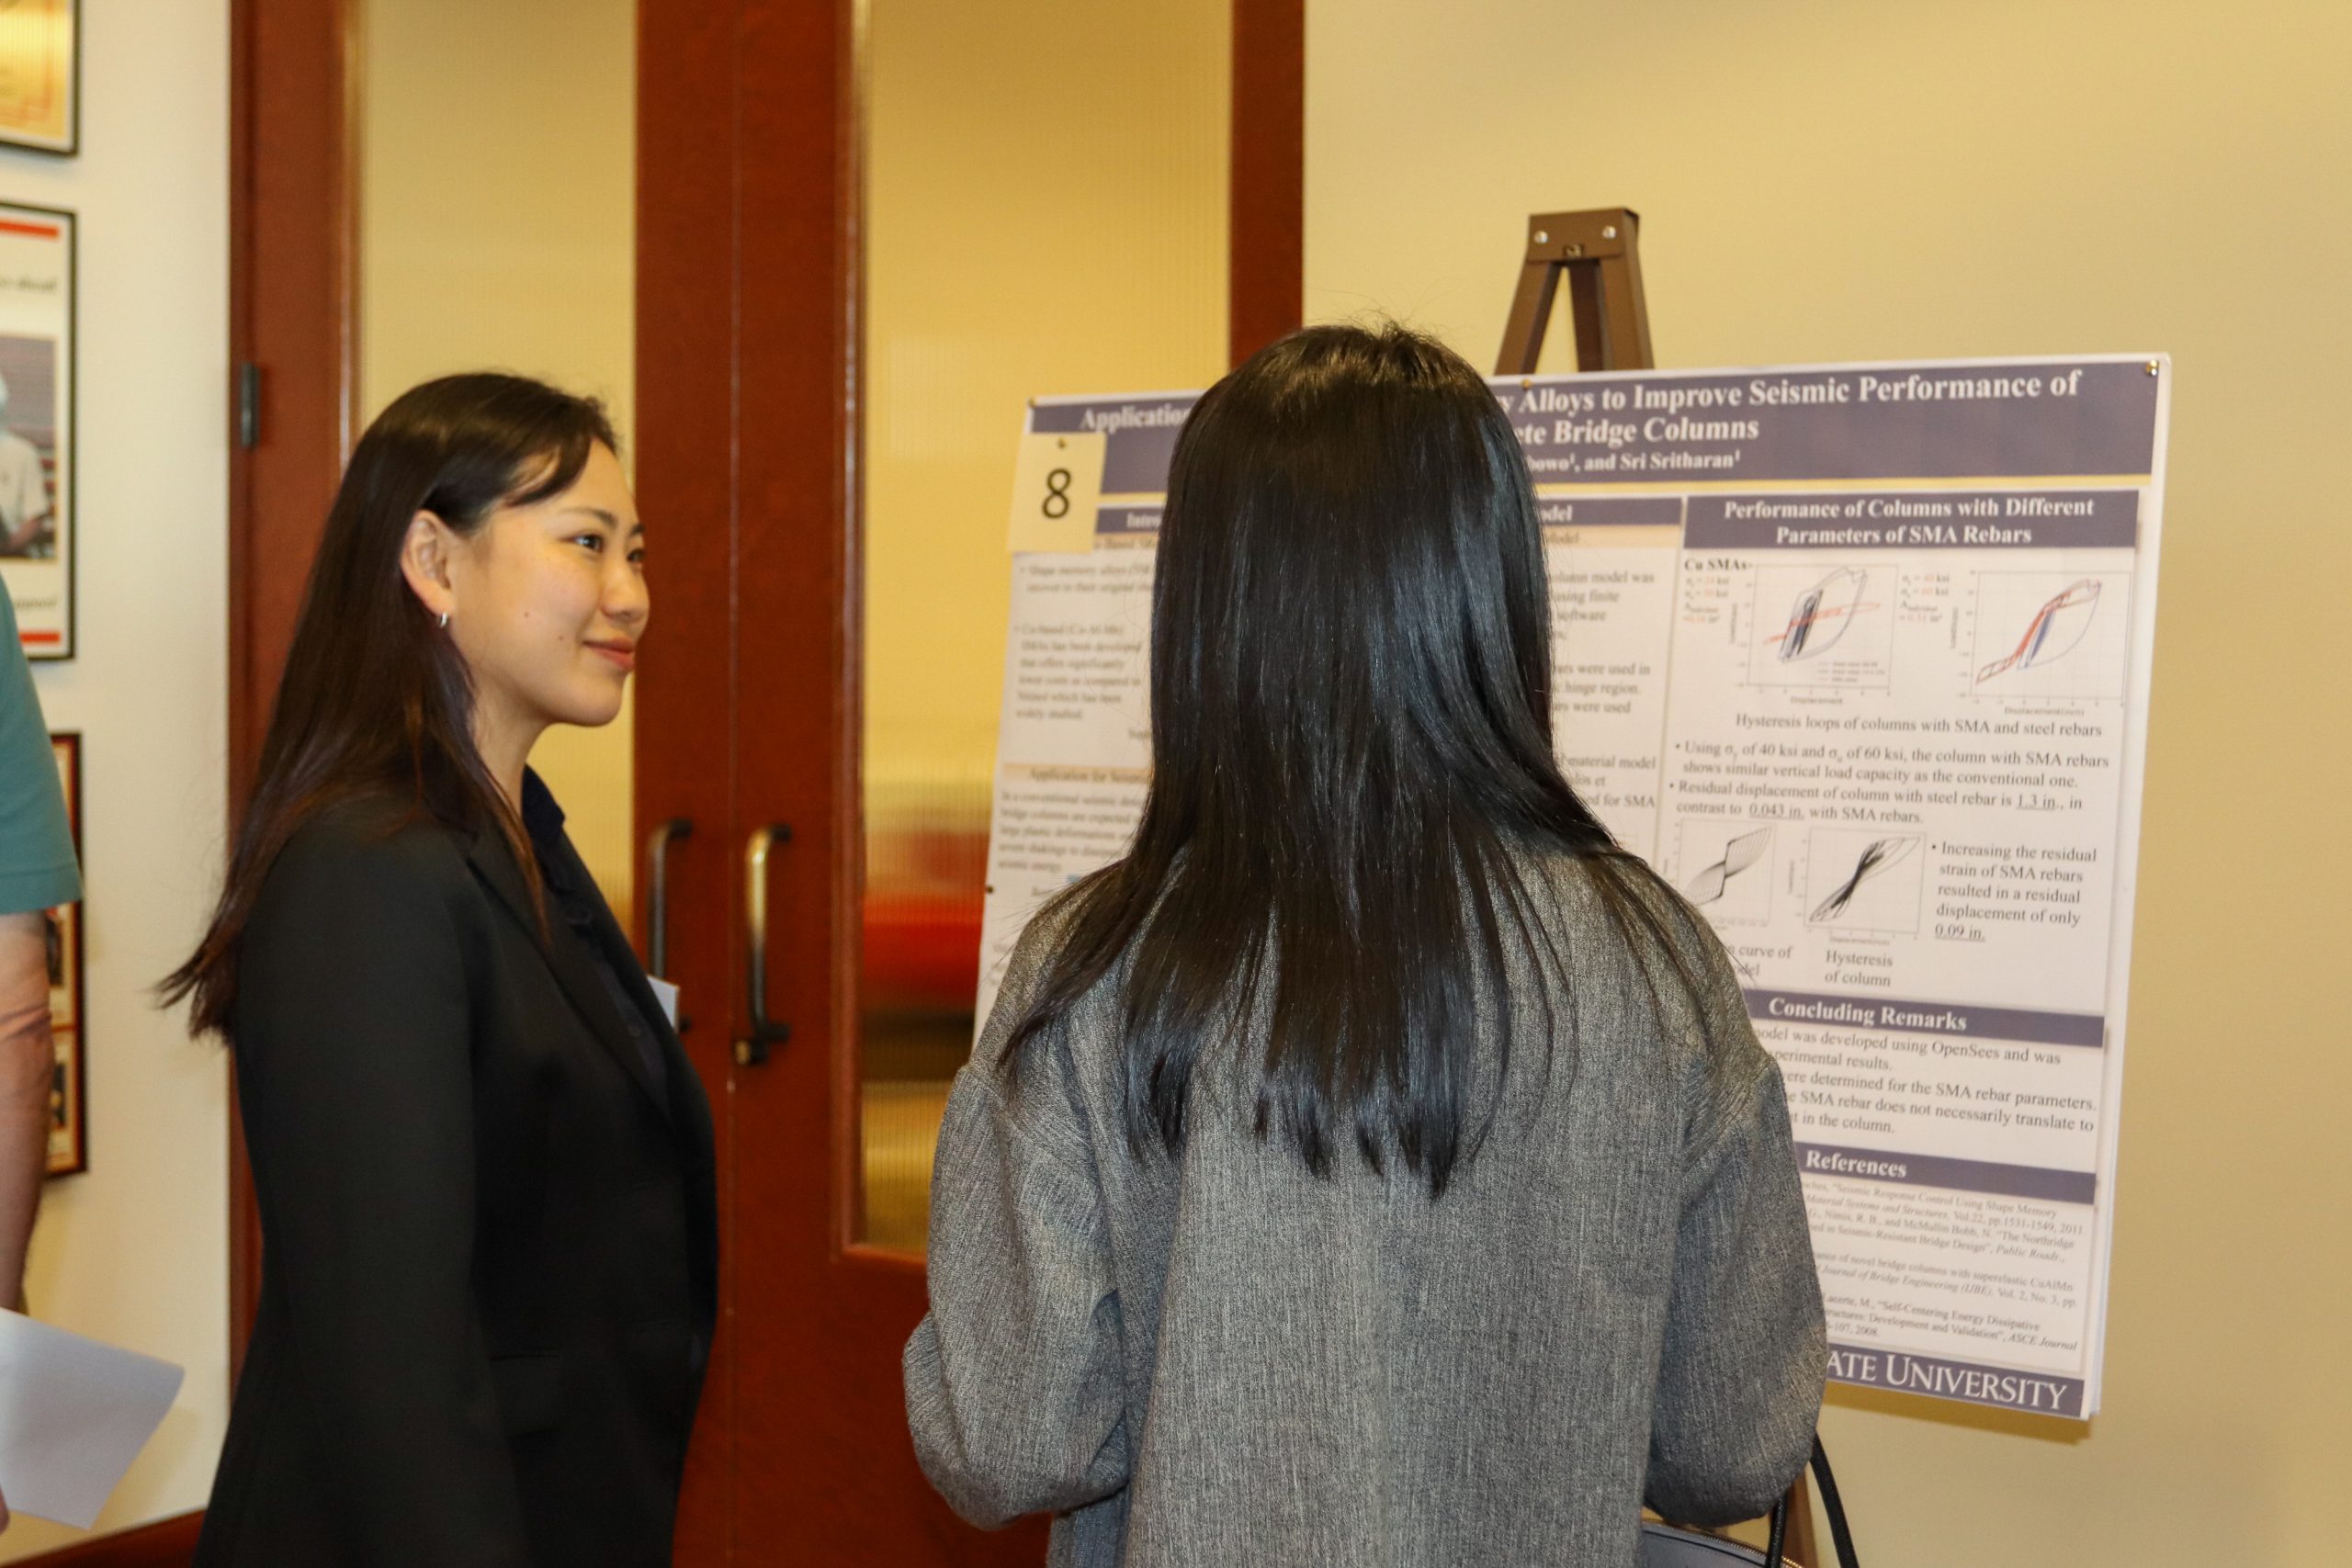 Two attendees talk with one another at the research symposium.